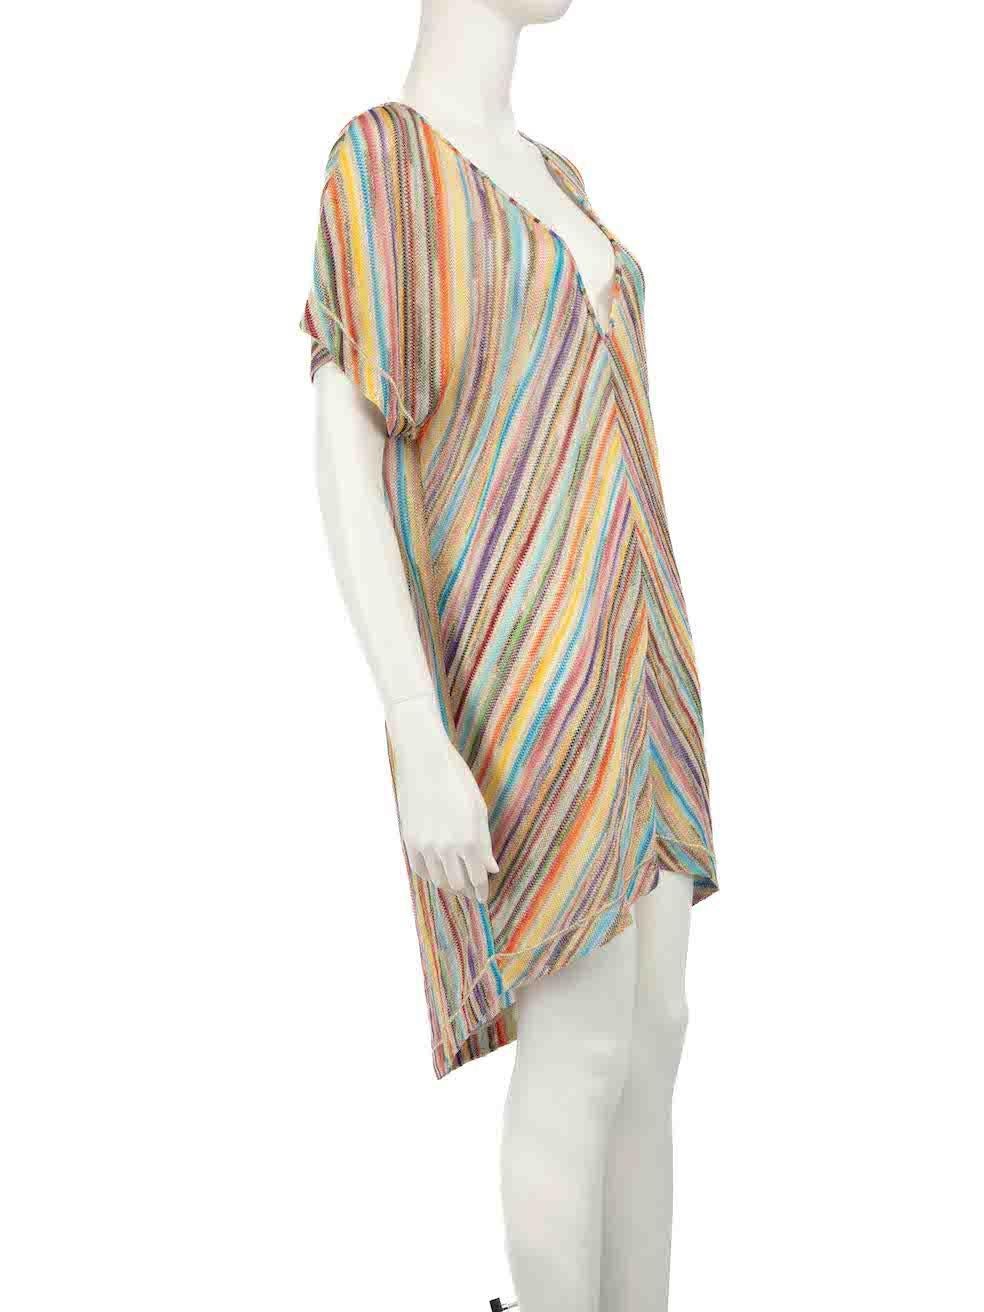 CONDITION is Very good. Hardly any visible wear to dress is evident on this used Missoni Mare designer resale item.
 
 
 
 Details
 
 
 Multicolour
 
 Viscose
 
 Beach dress
 
 Knitted
 
 Striped pattern
 
 Metallic thread
 
 V-neck
 
 See-through
